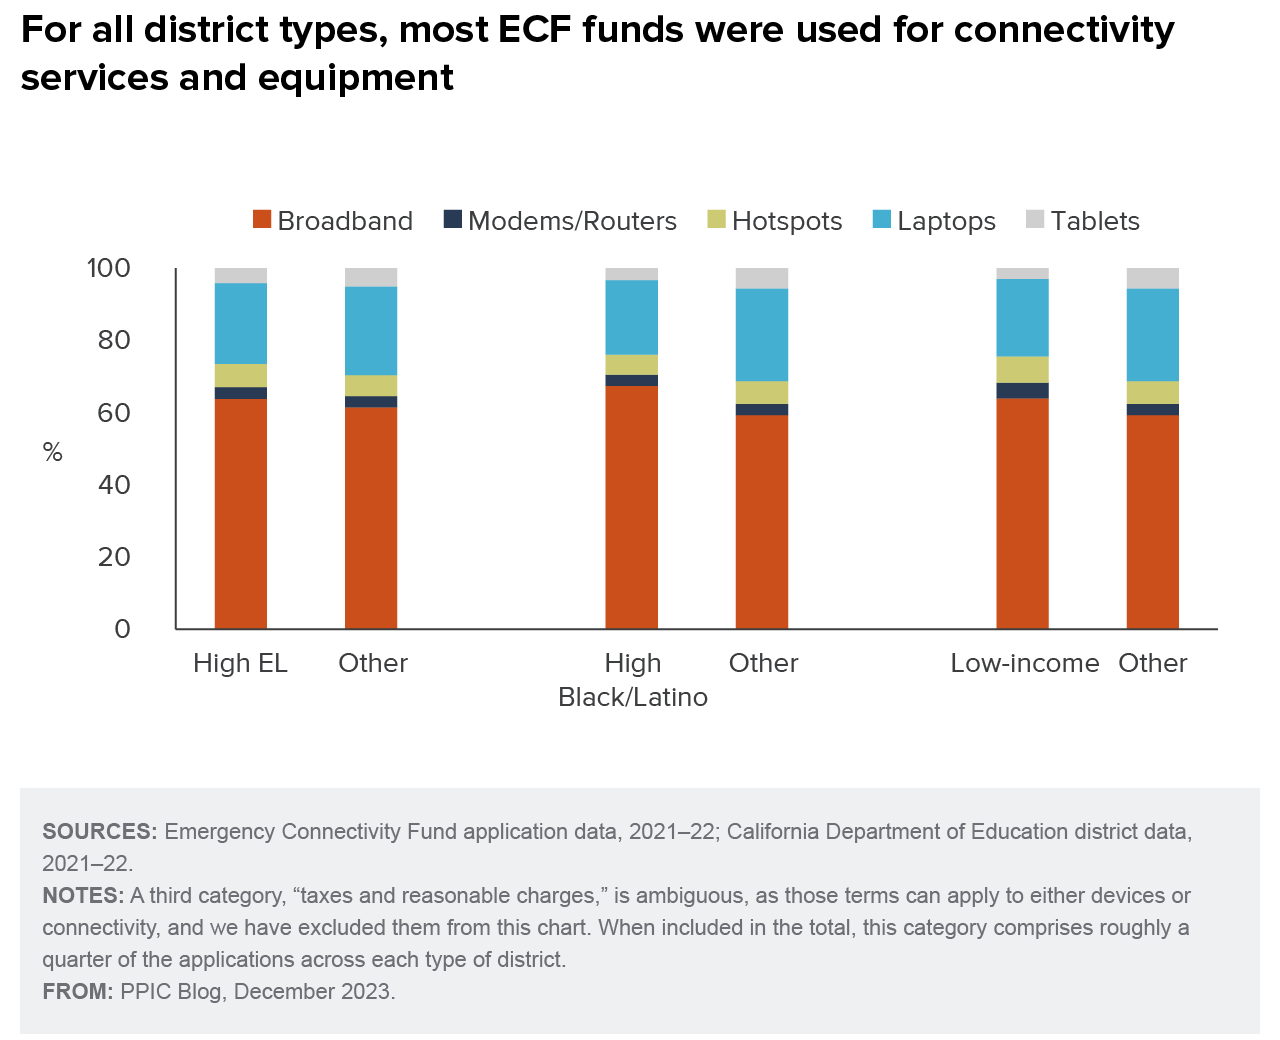 figure - For all district types, most ECF funds were used for connectivity services and equipment